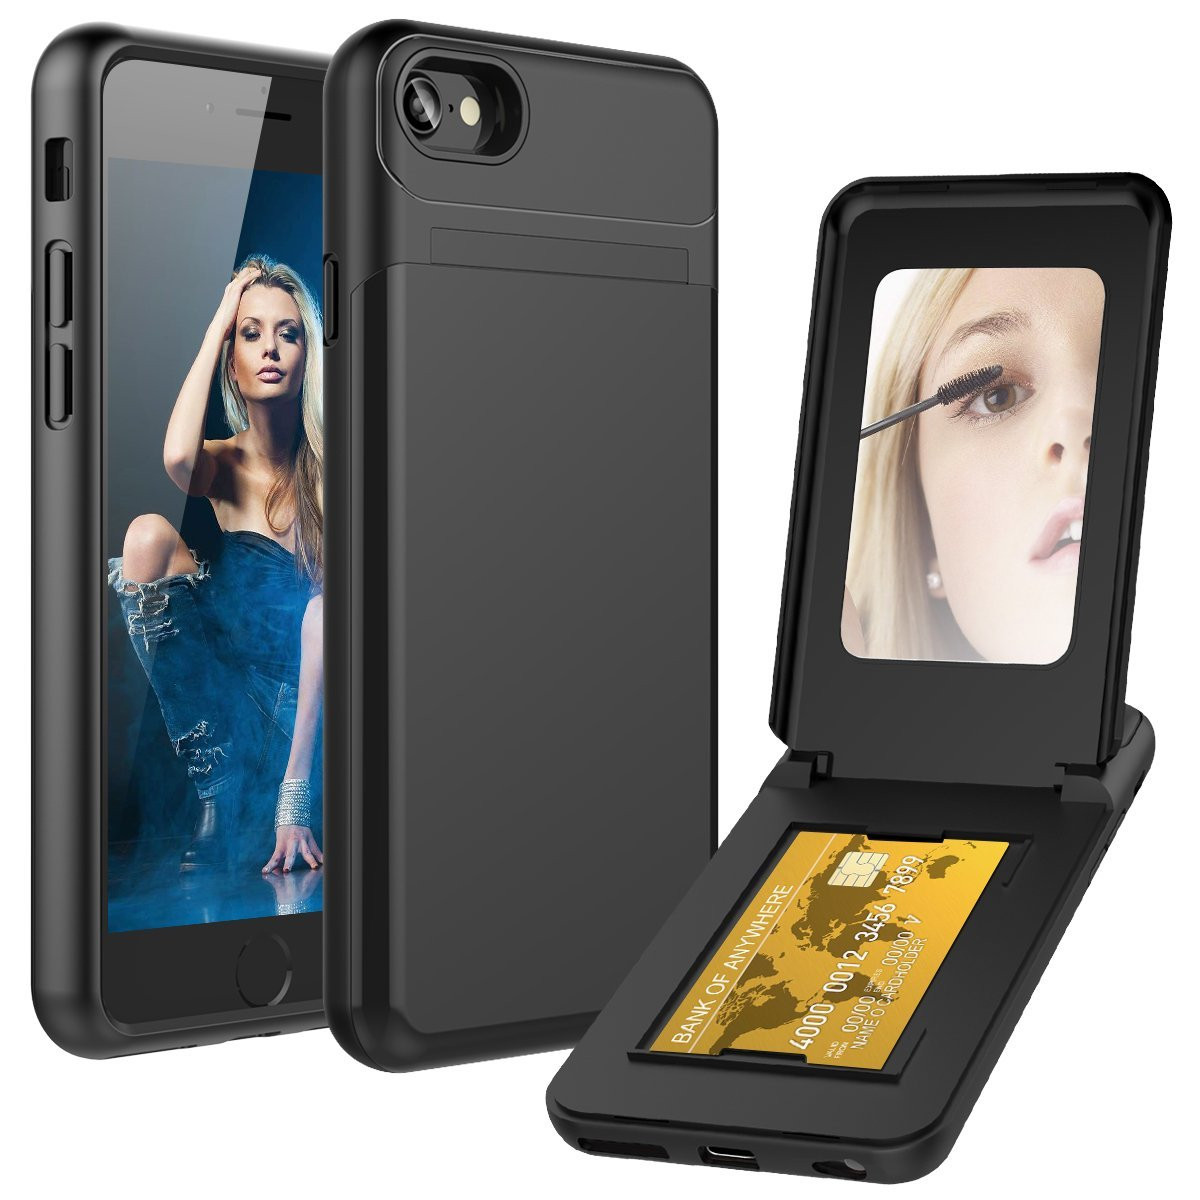 Apple iPhone 6 -  Hard Phone Case with Hidden Mirror and Card Holder Compartment, Black